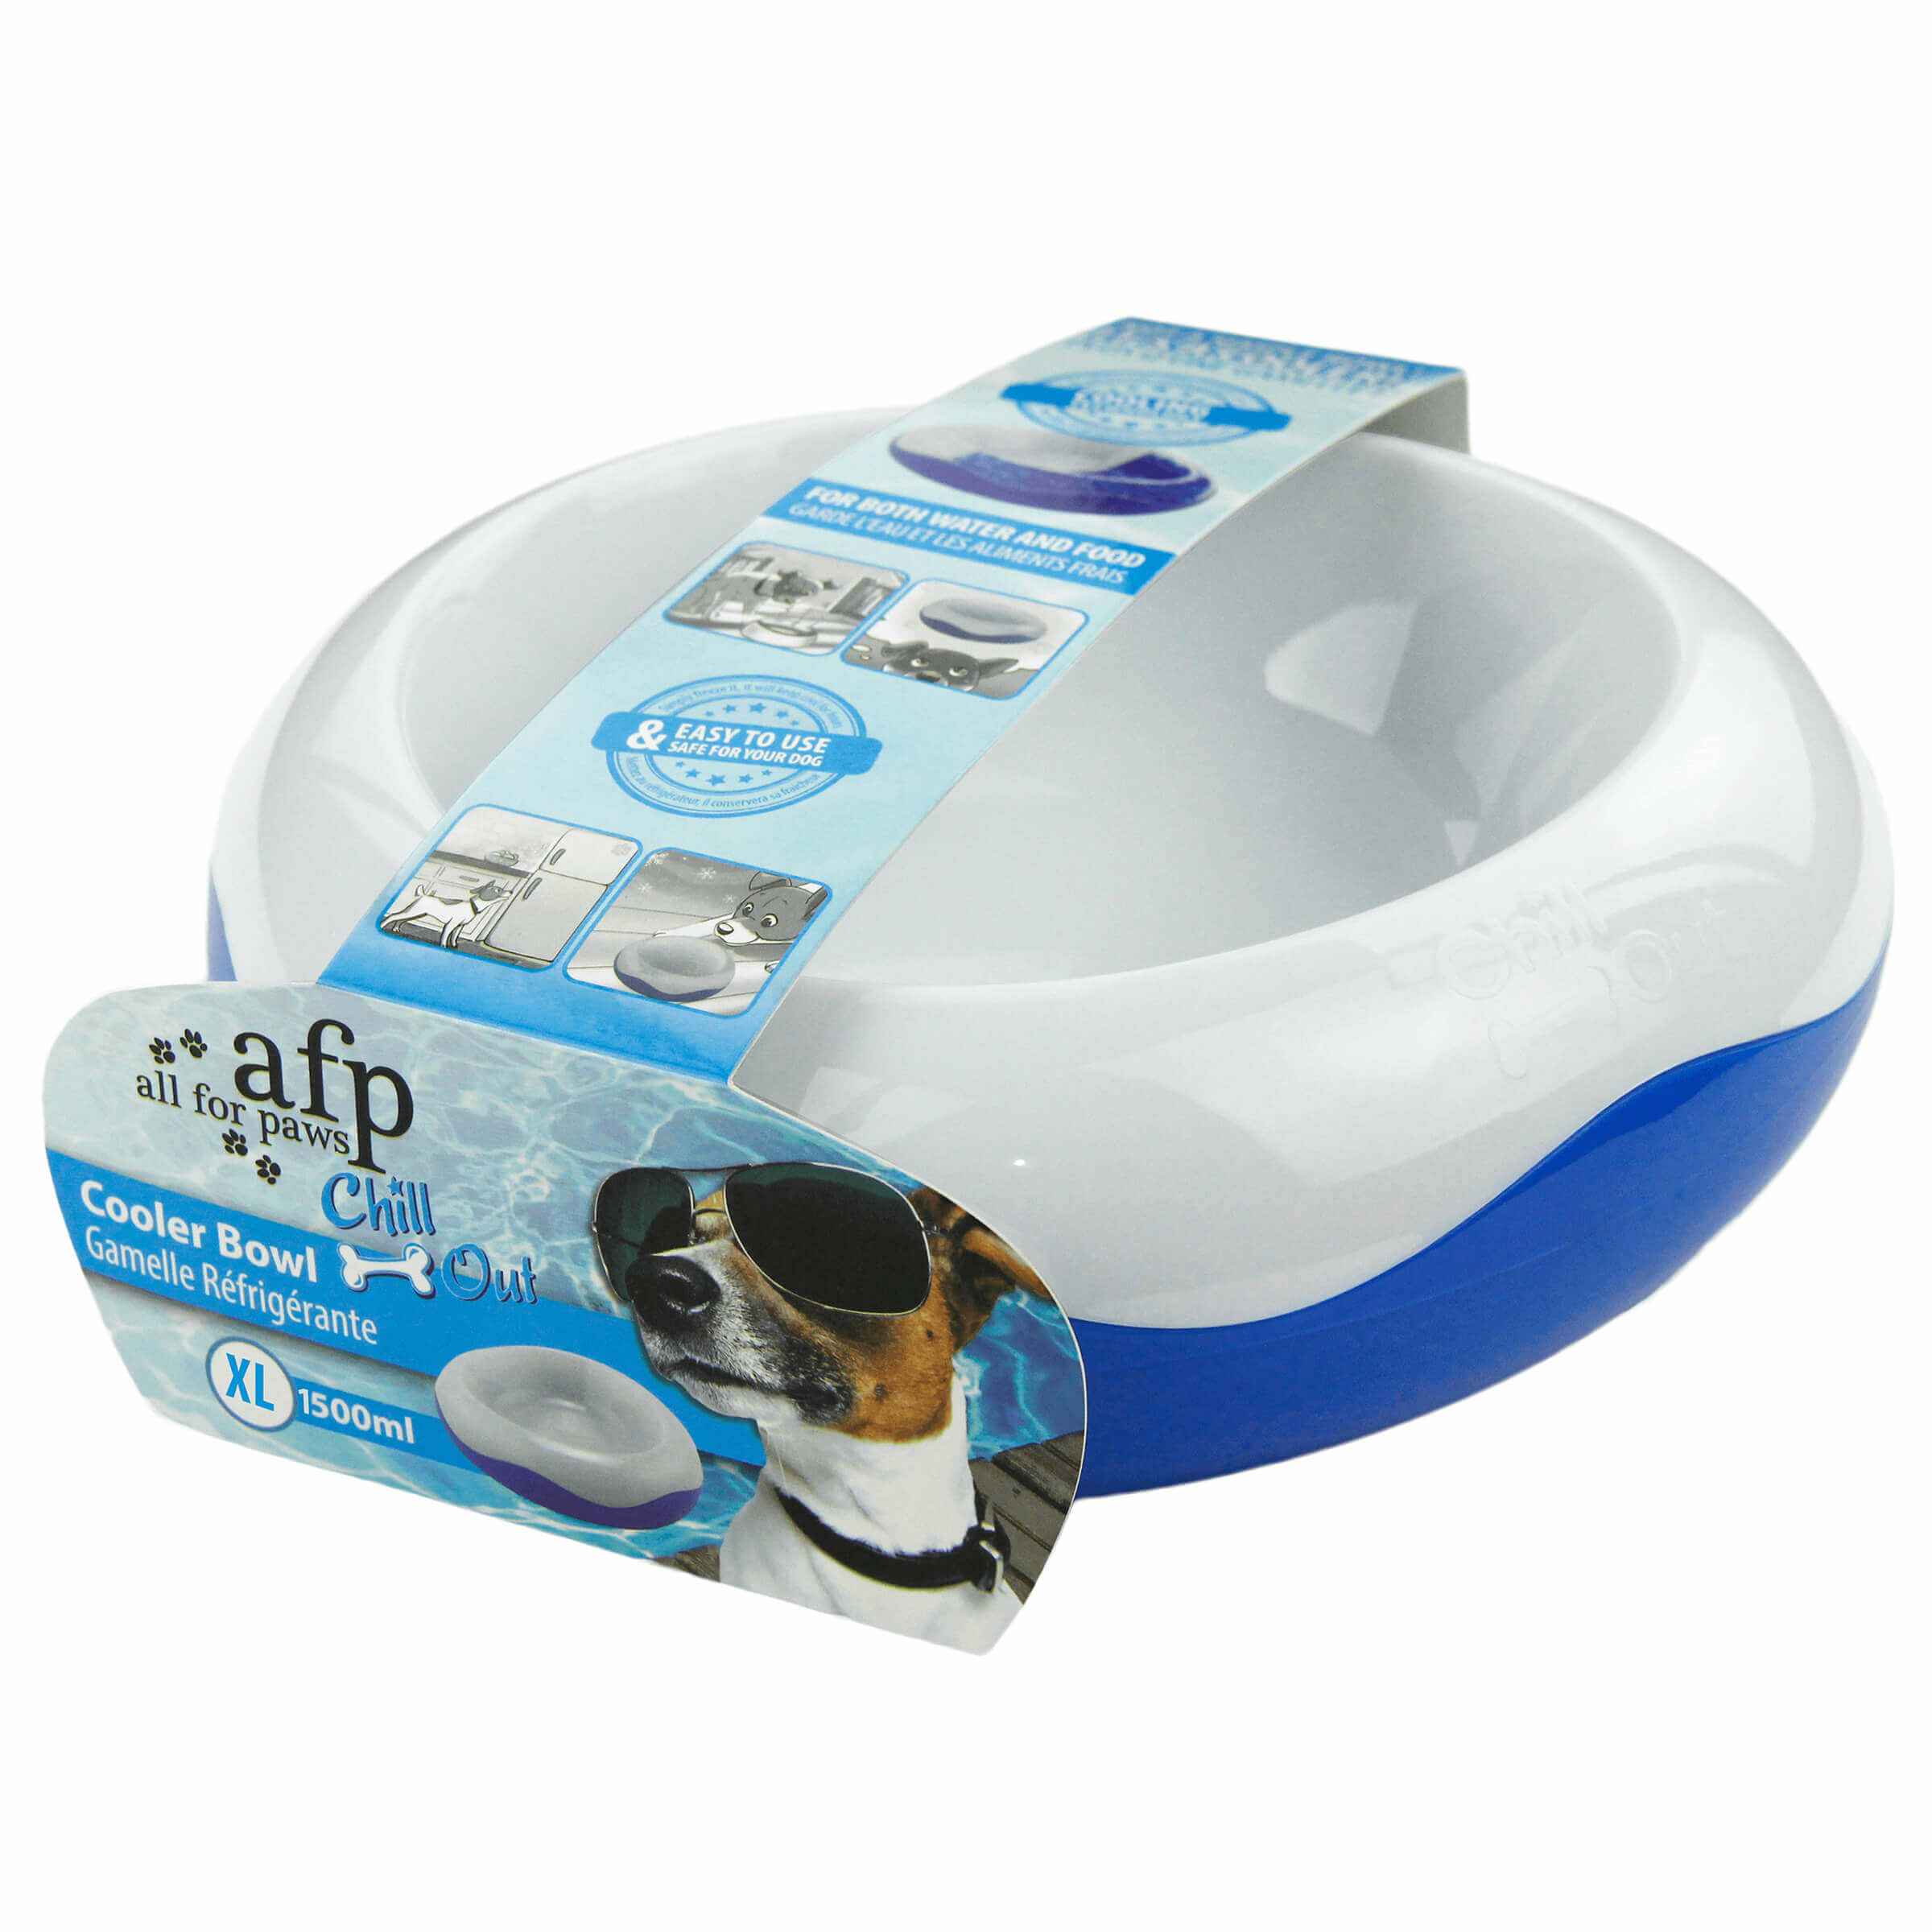 All for Paws Chill Out Cooler Bowl Grösse XL 1500ml